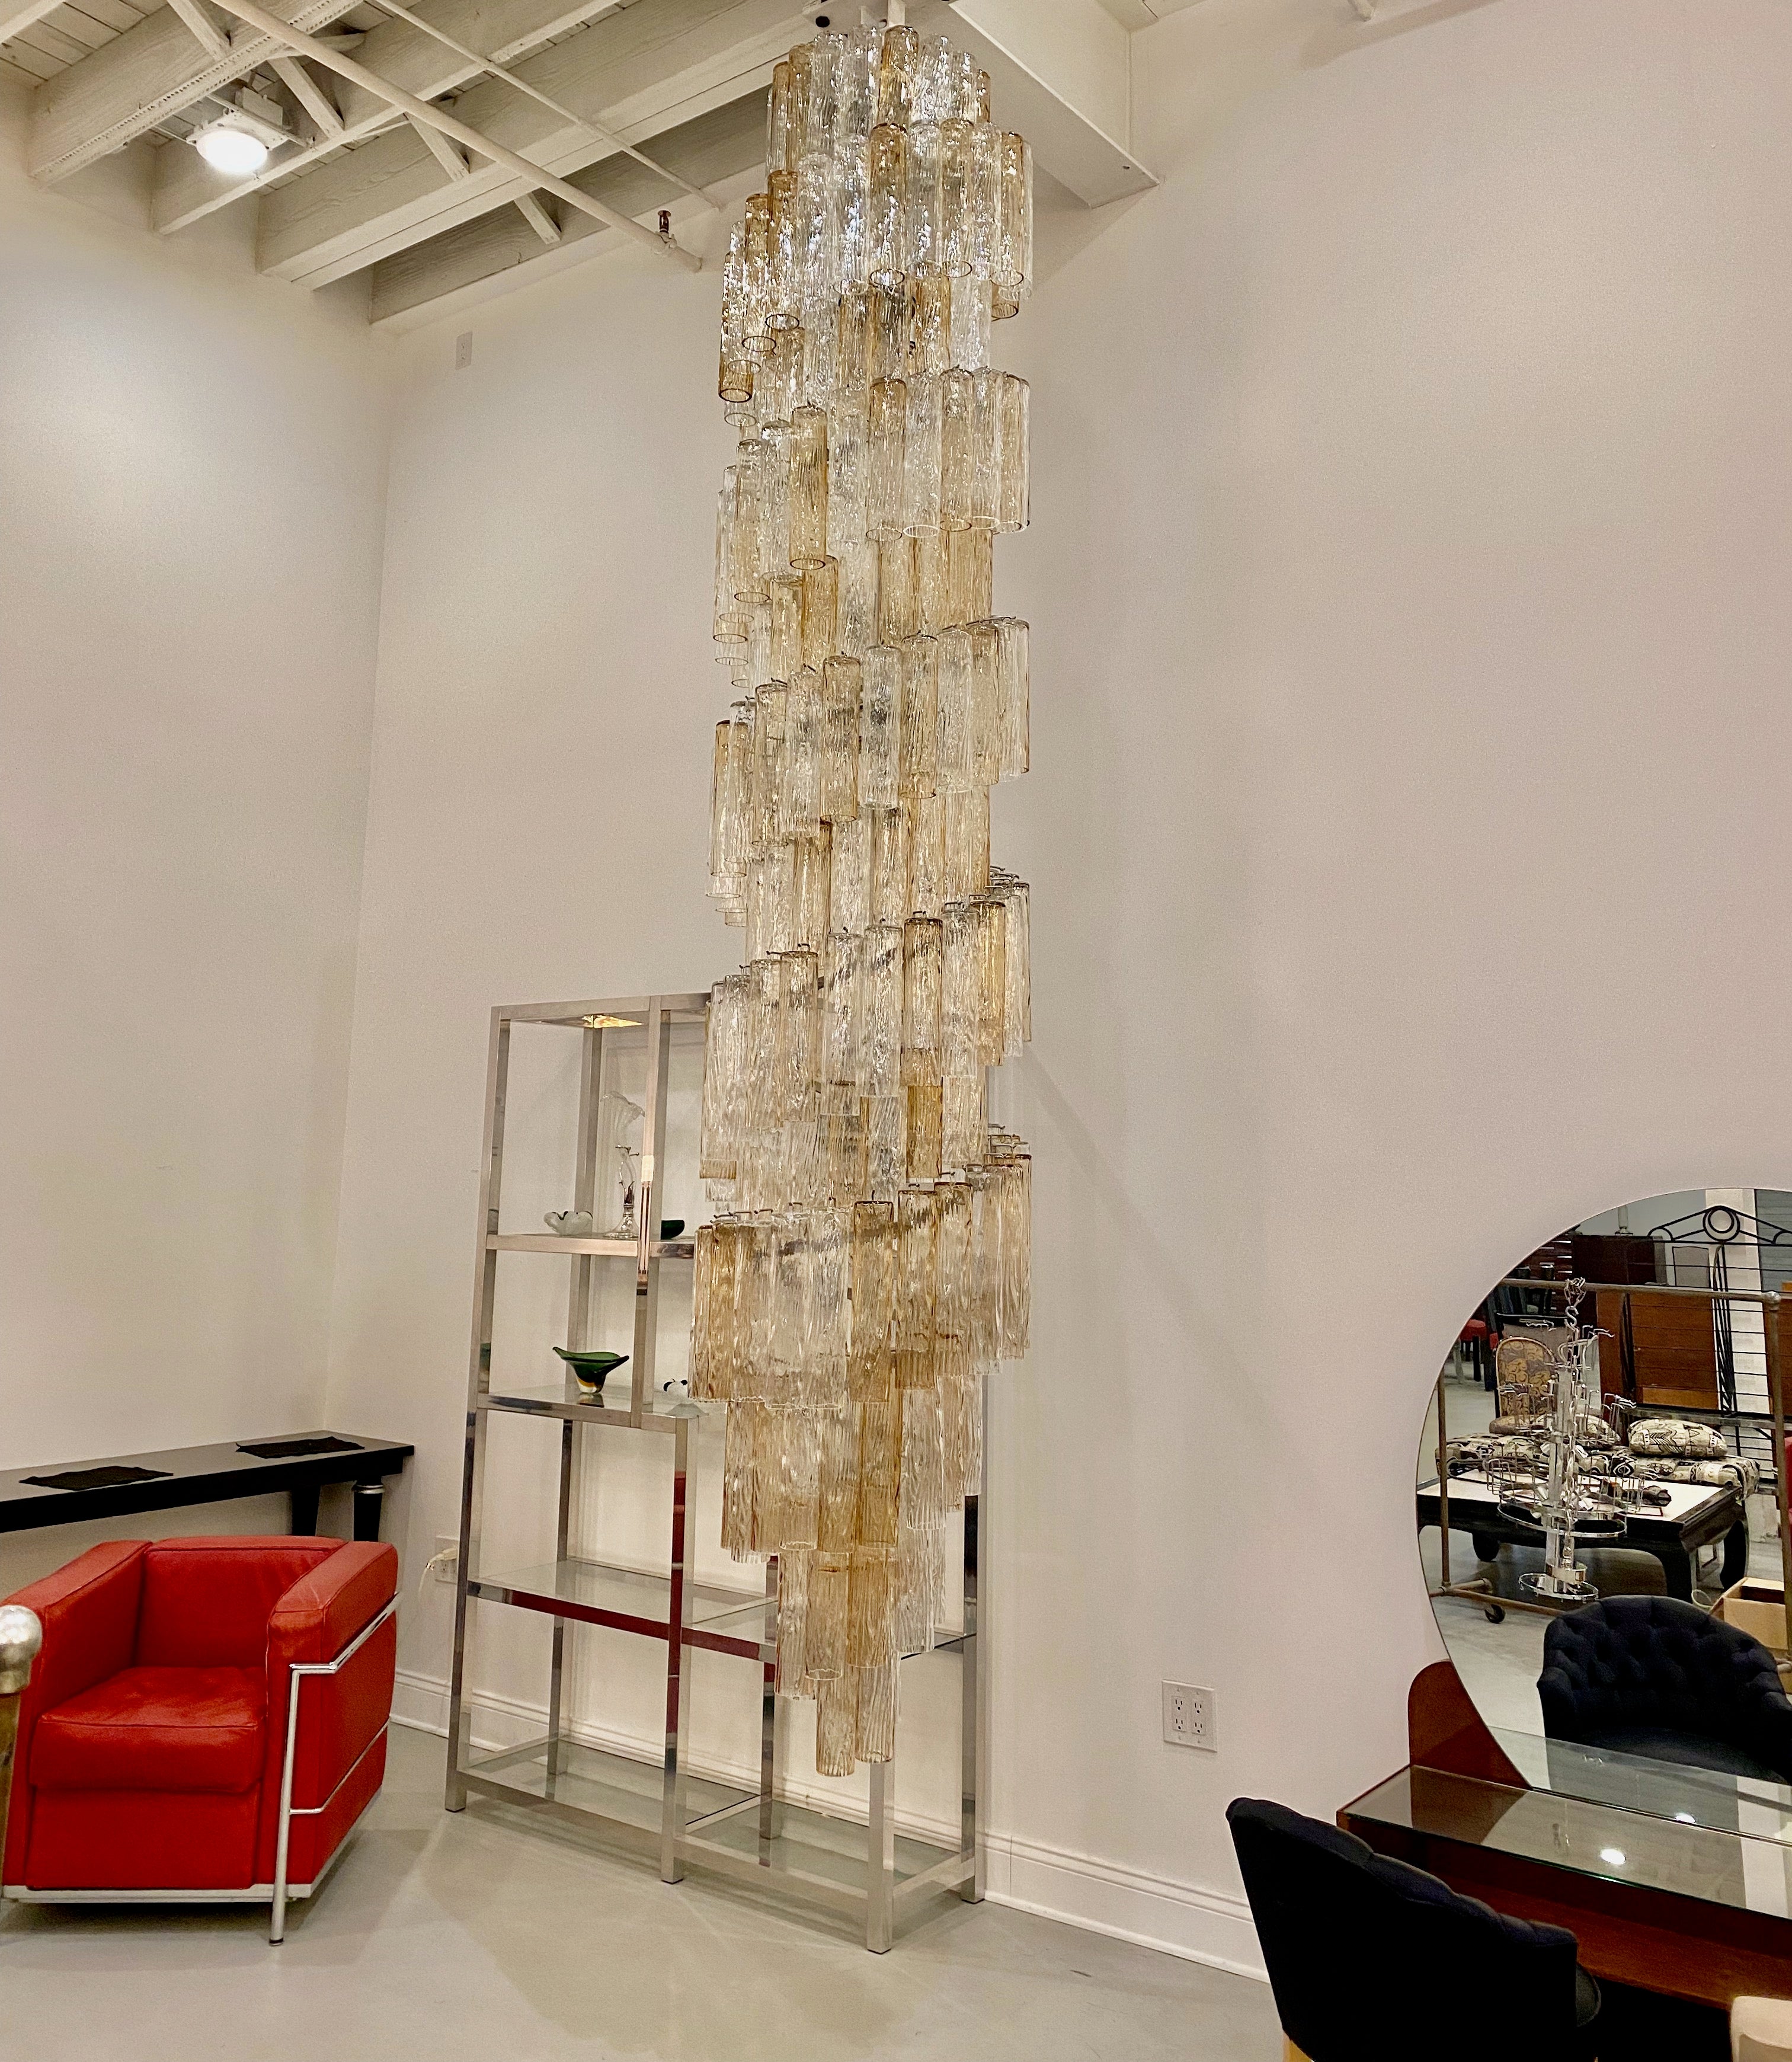 Stunning Mid Century Modern Italian Chandelier by talented artist Archimede Seguso. This double waterfall chandelier has Tronchi glass tubes hanging from hooks onto a nickel (silver) frame, as pictured. The is one of the tallest chandeliers hanging